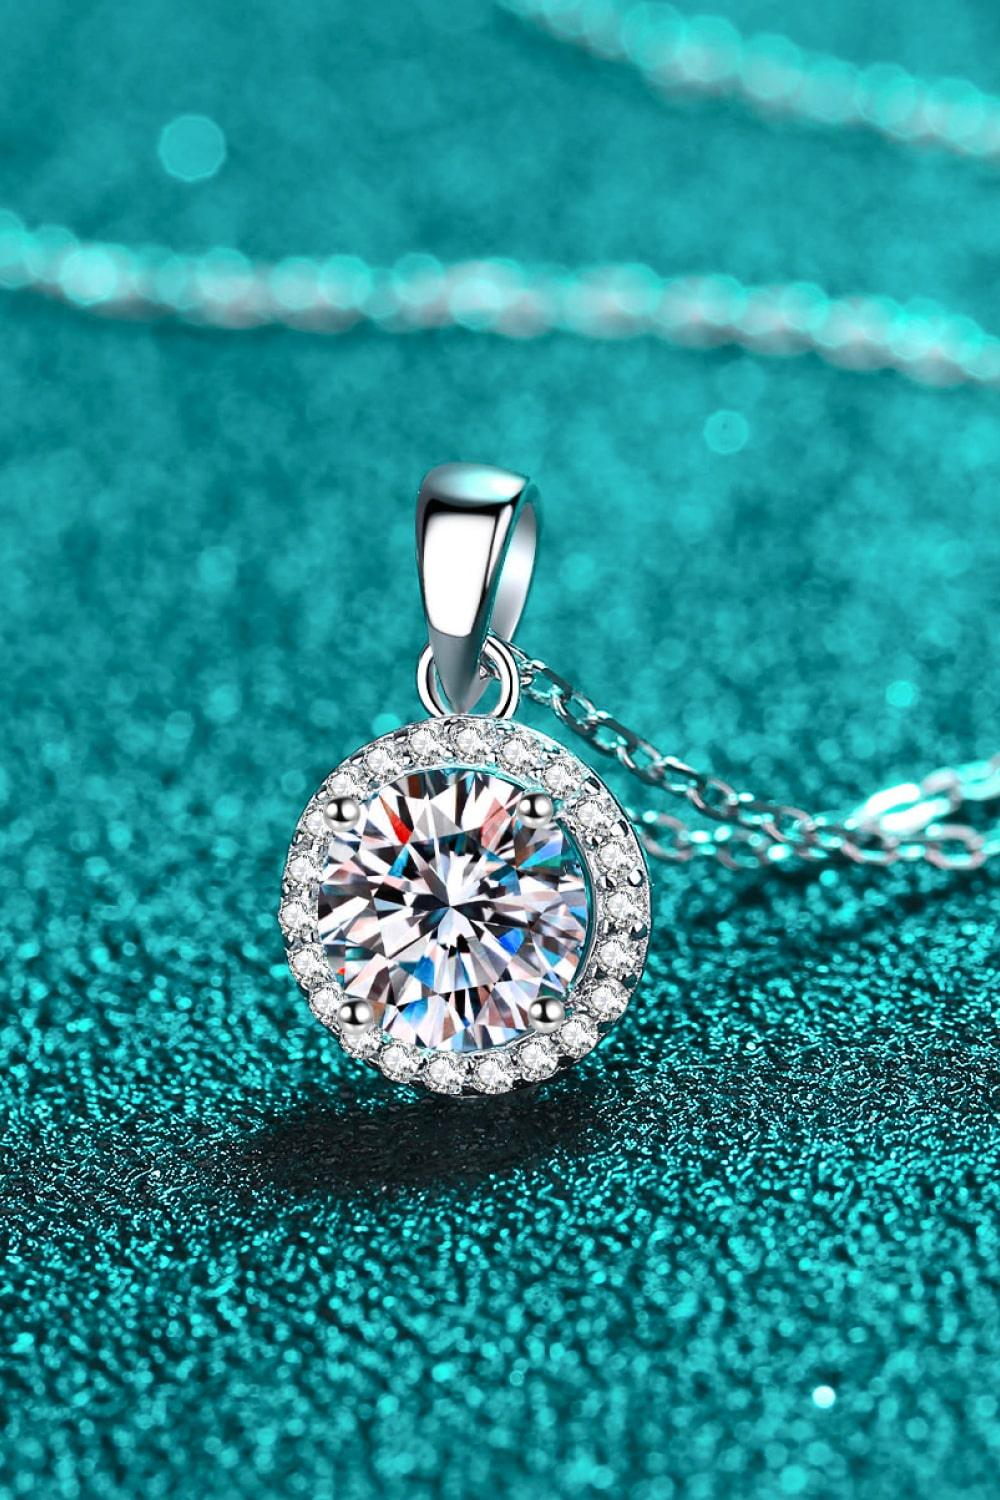 Chance to Charm 1 Carat Moissanite Round Pendant Chain Necklace - Flyclothing LLC